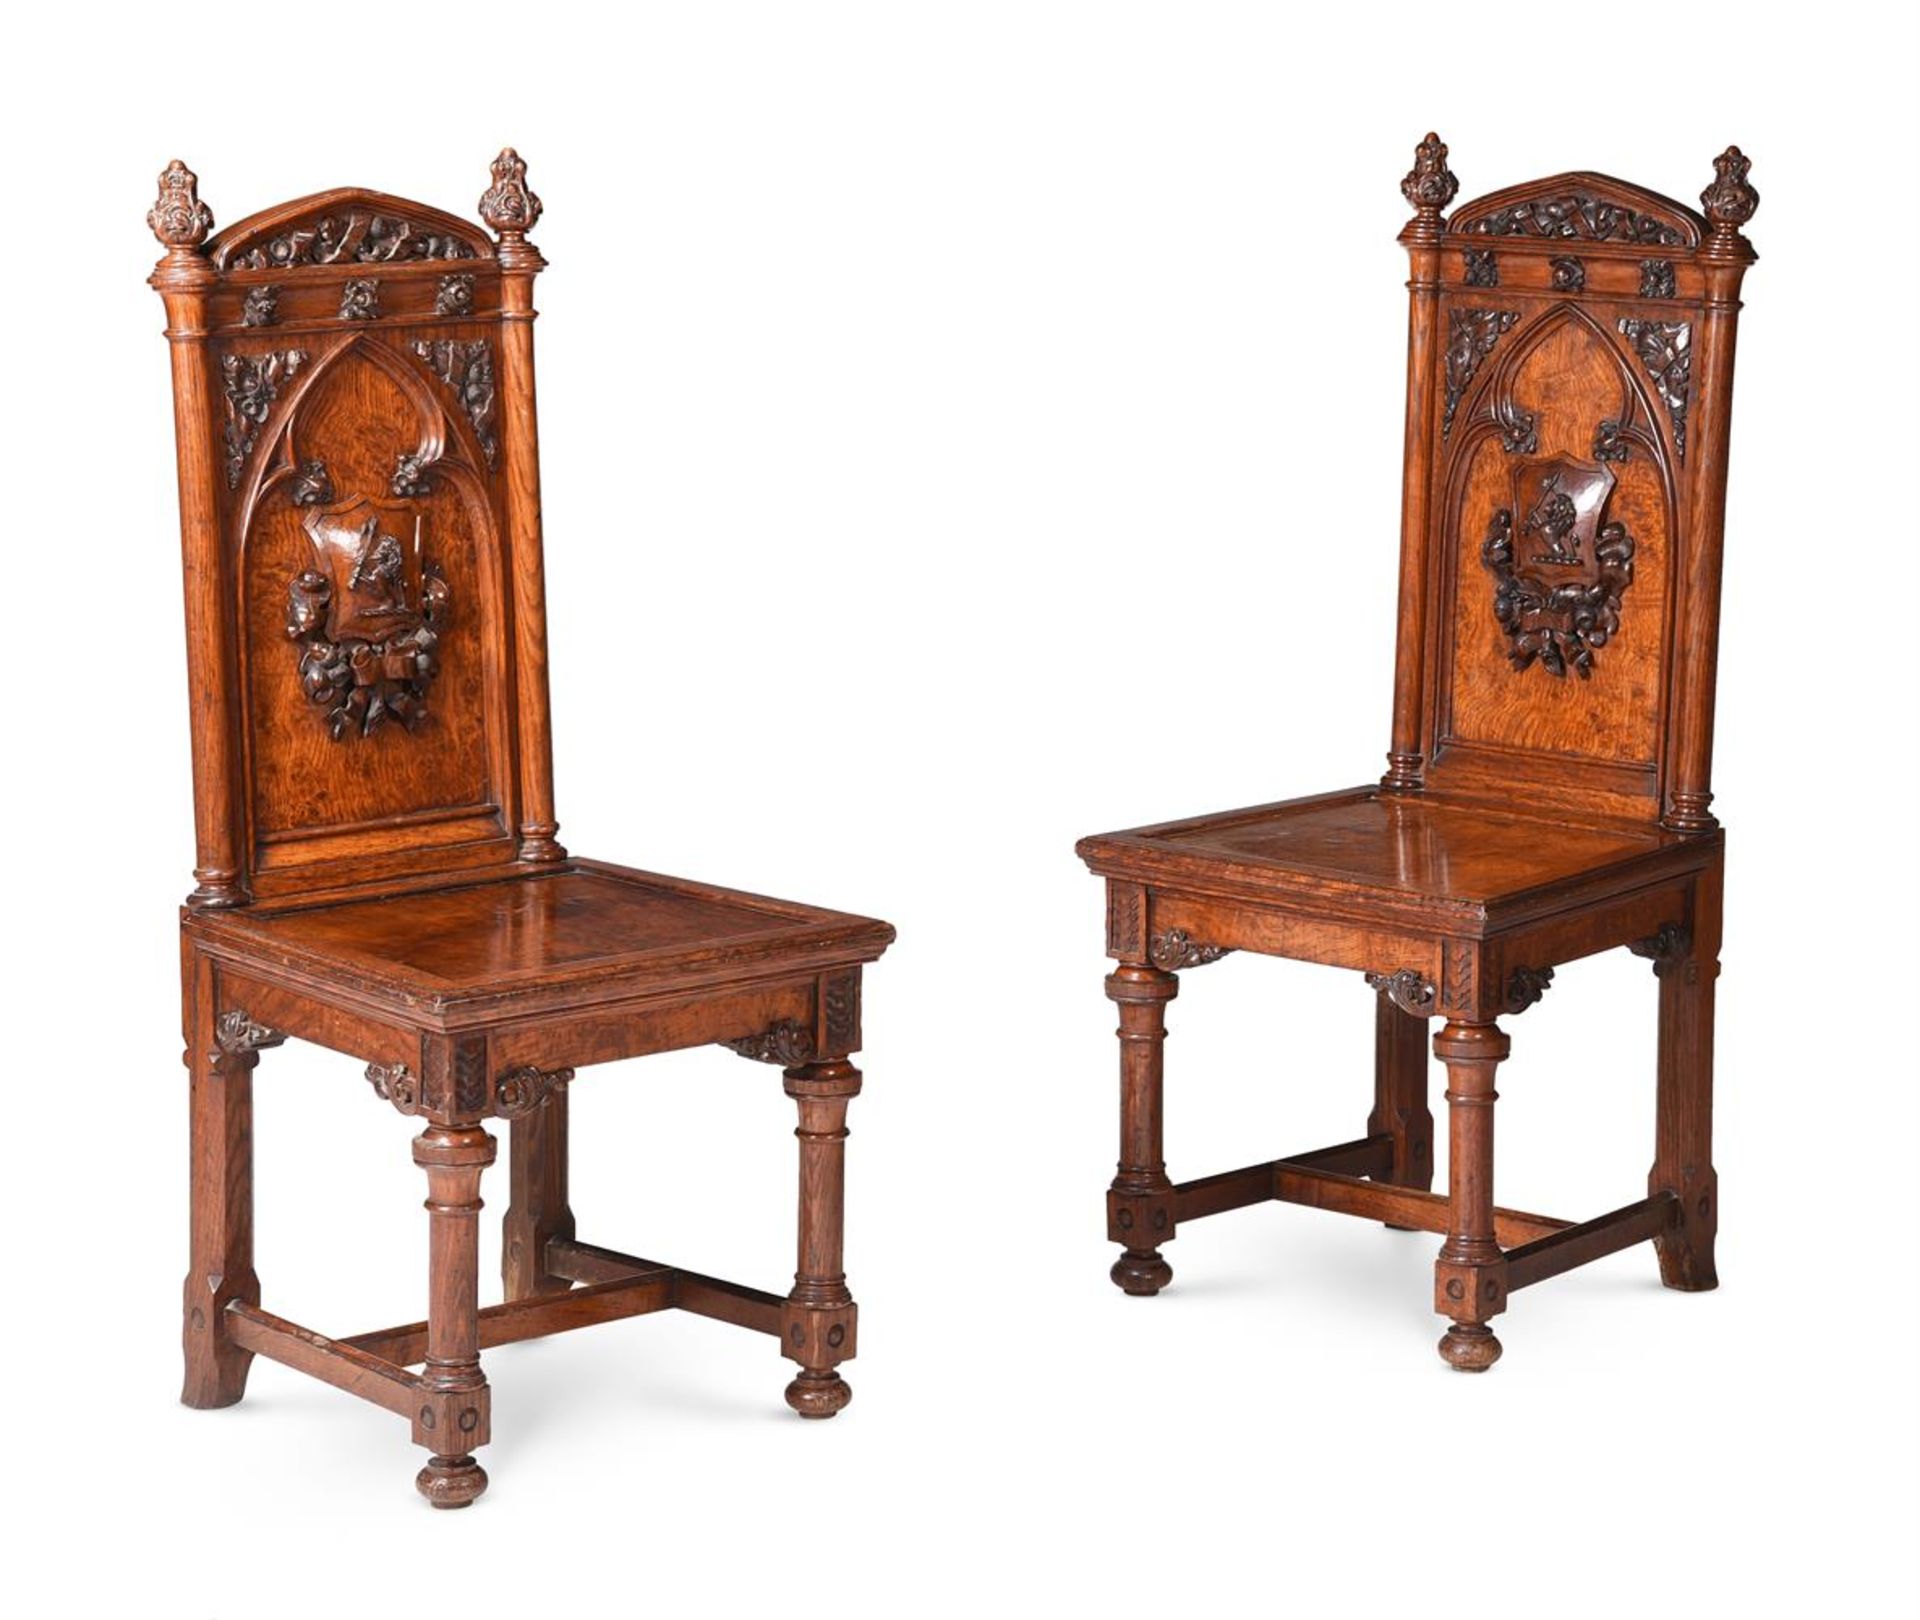 A PAIR OF VICTORIAN FIGURED OAK AND BURR OAK HALL CHAIRS, SECOND HALF 19TH CENTURY